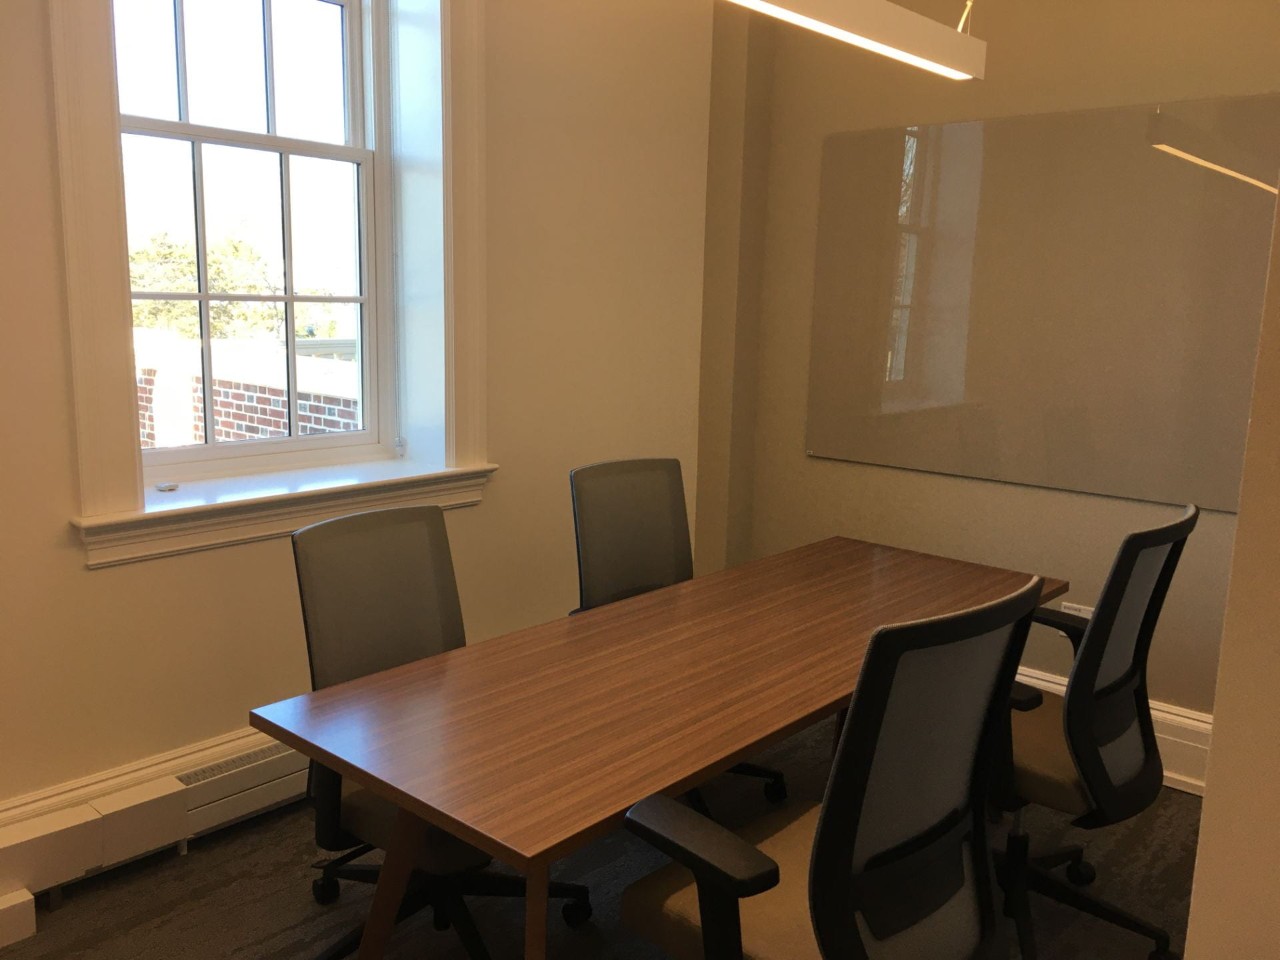 Meeting room with table. four chairs and glass writing board